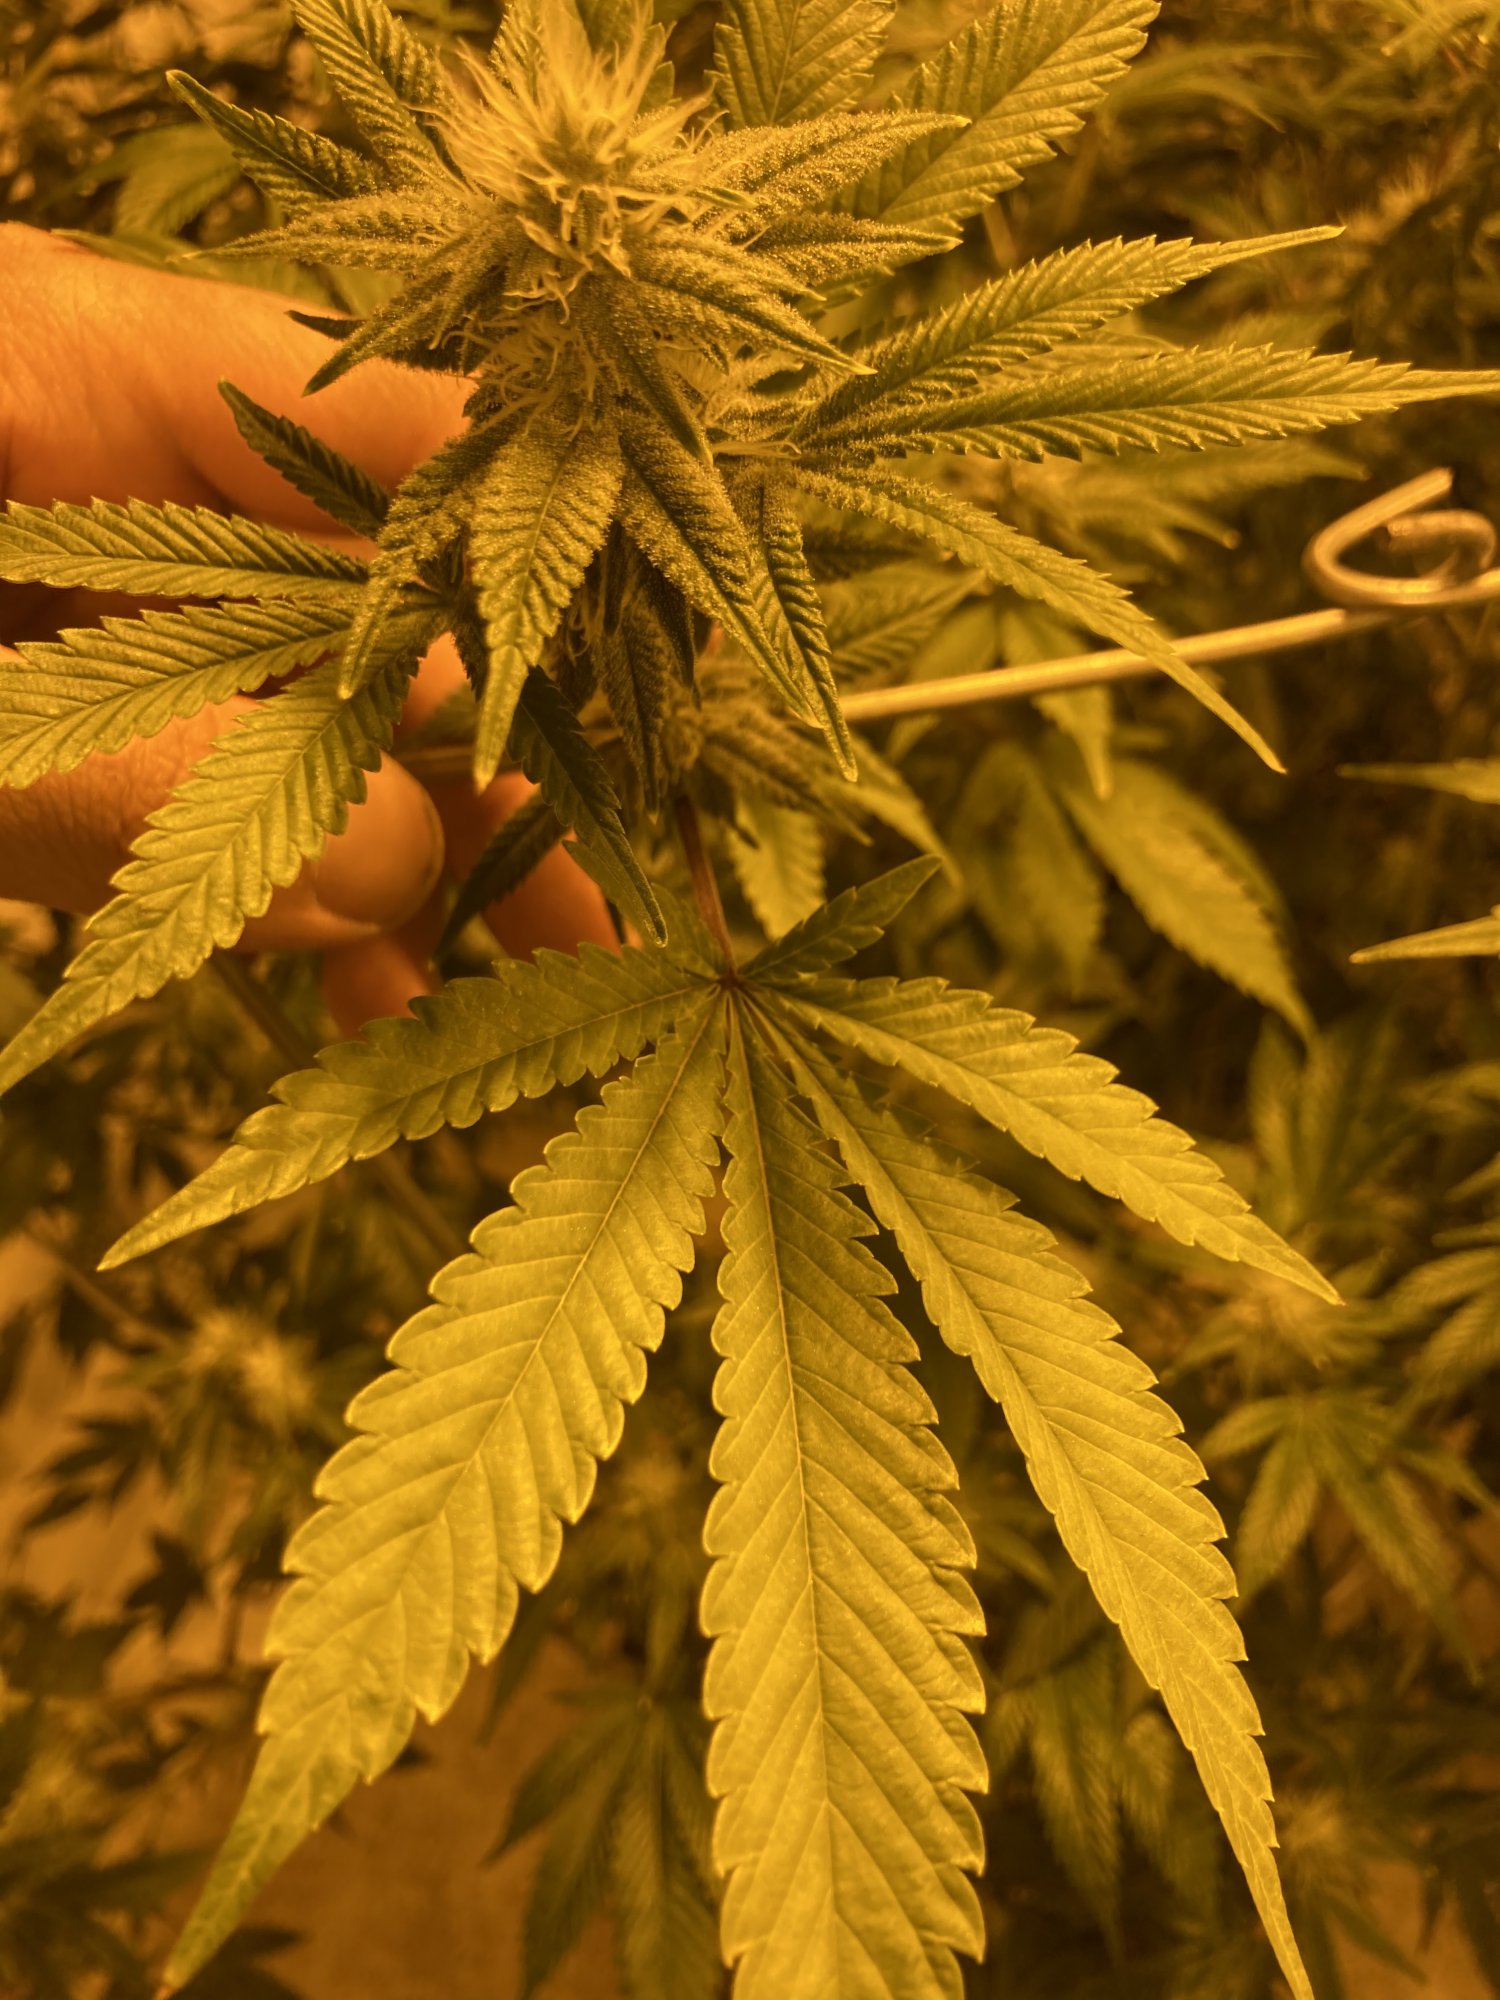 Plants leave color not looking healthy 2